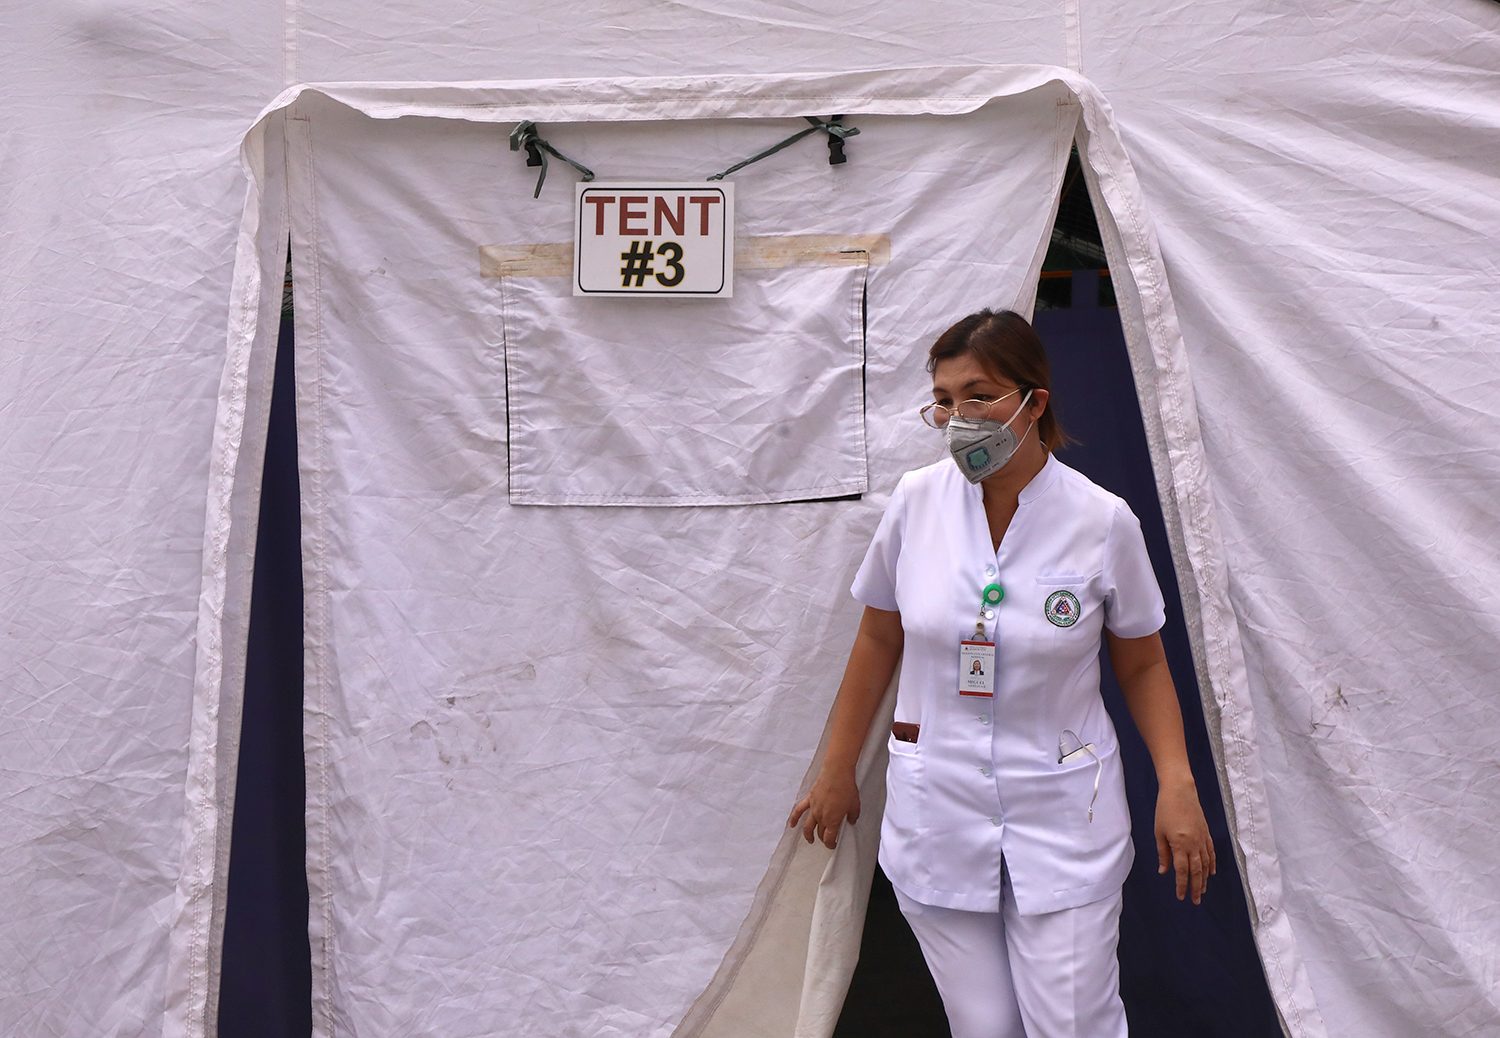 ISOLATION. A health professional from Quezon City General Hospital leaves an isolation tent for persons suspected to have COVID-19 on March 10, 2020. Photo by Darren Langit/Rappler  